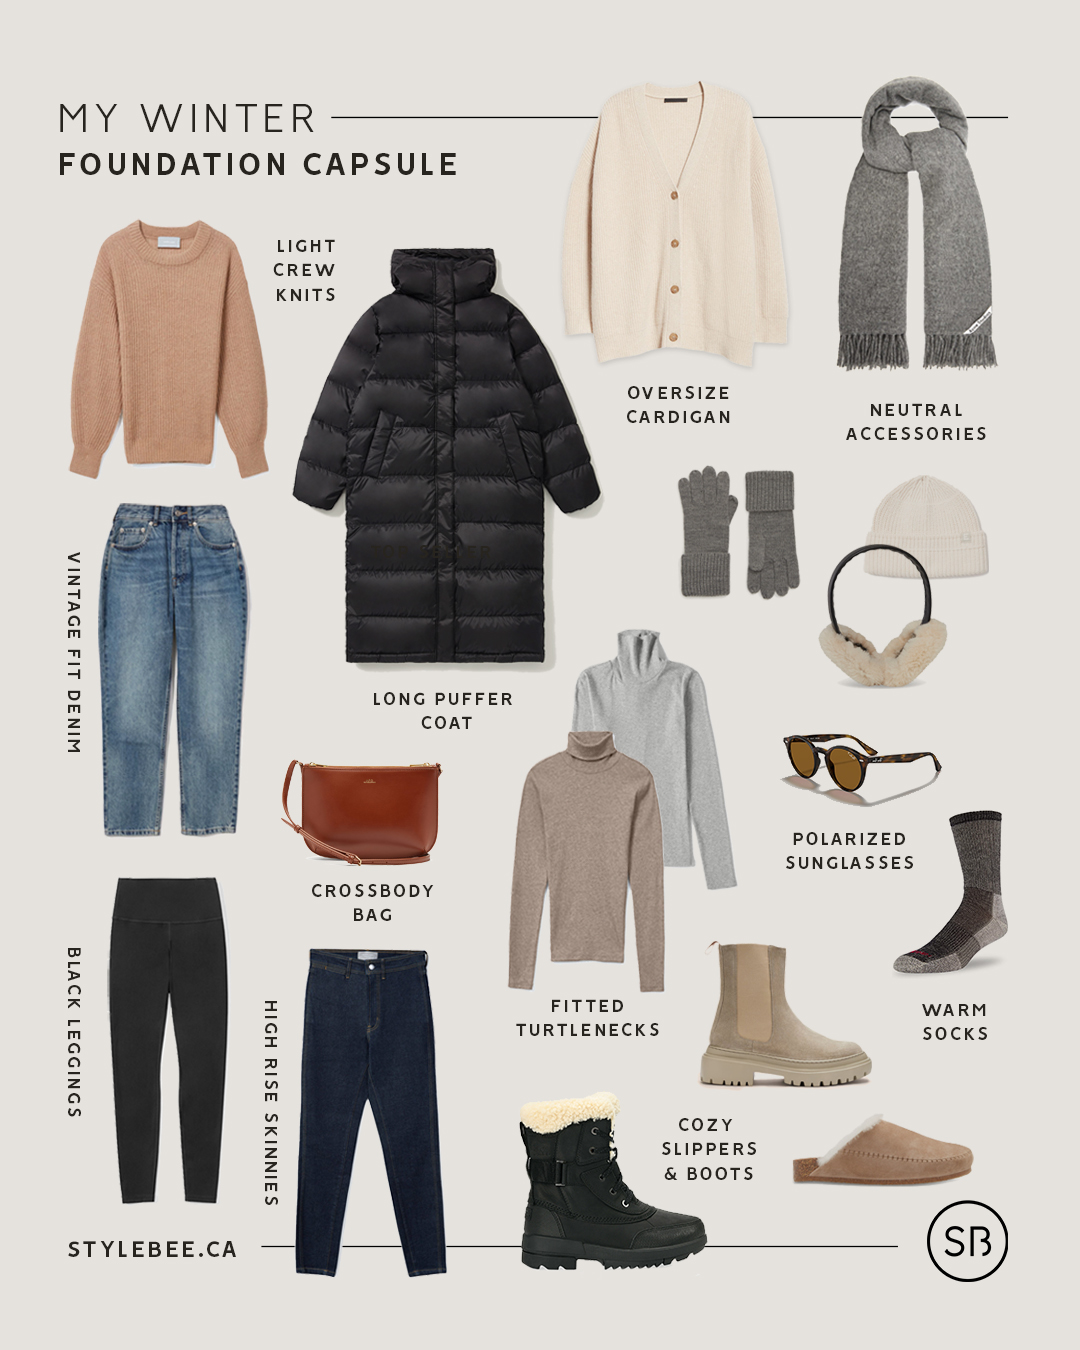 Best Winter Clothes For Canada: Essentials For Men and Women - My Ticklefeet